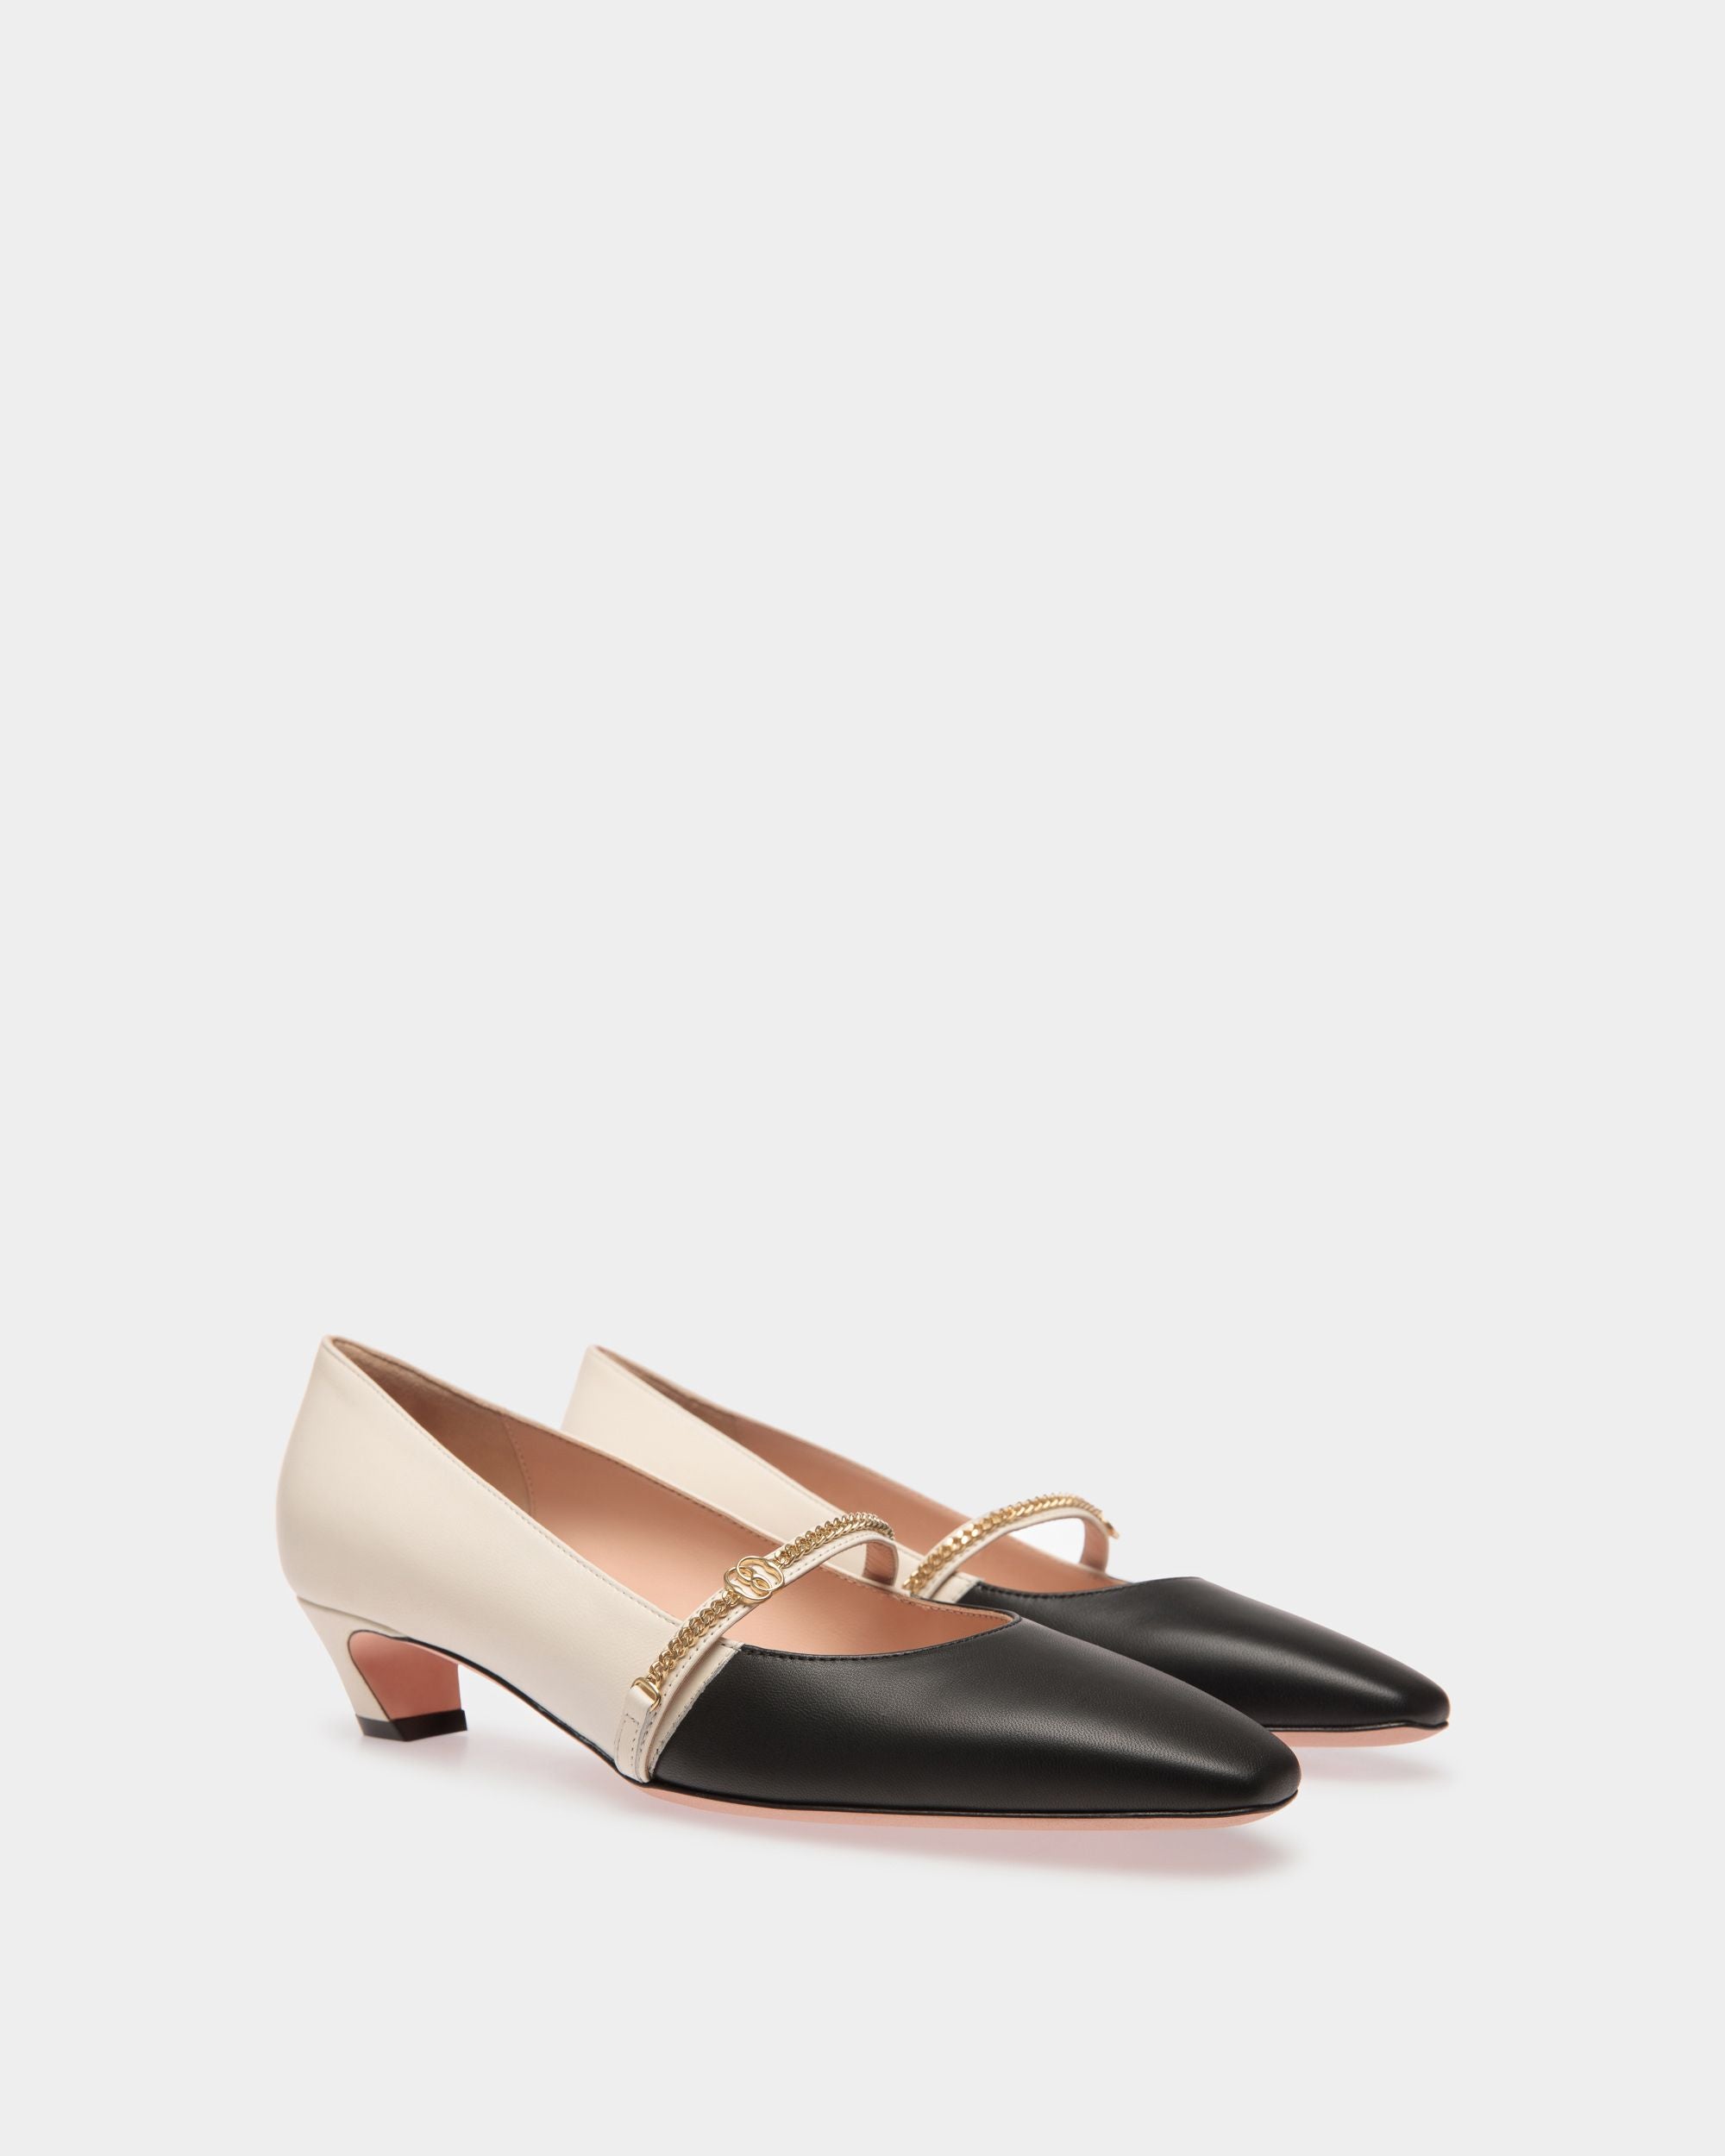 Sylt | Women's Mary-Jane Pump in Black And White Leather | Bally | Still Life 3/4 Front